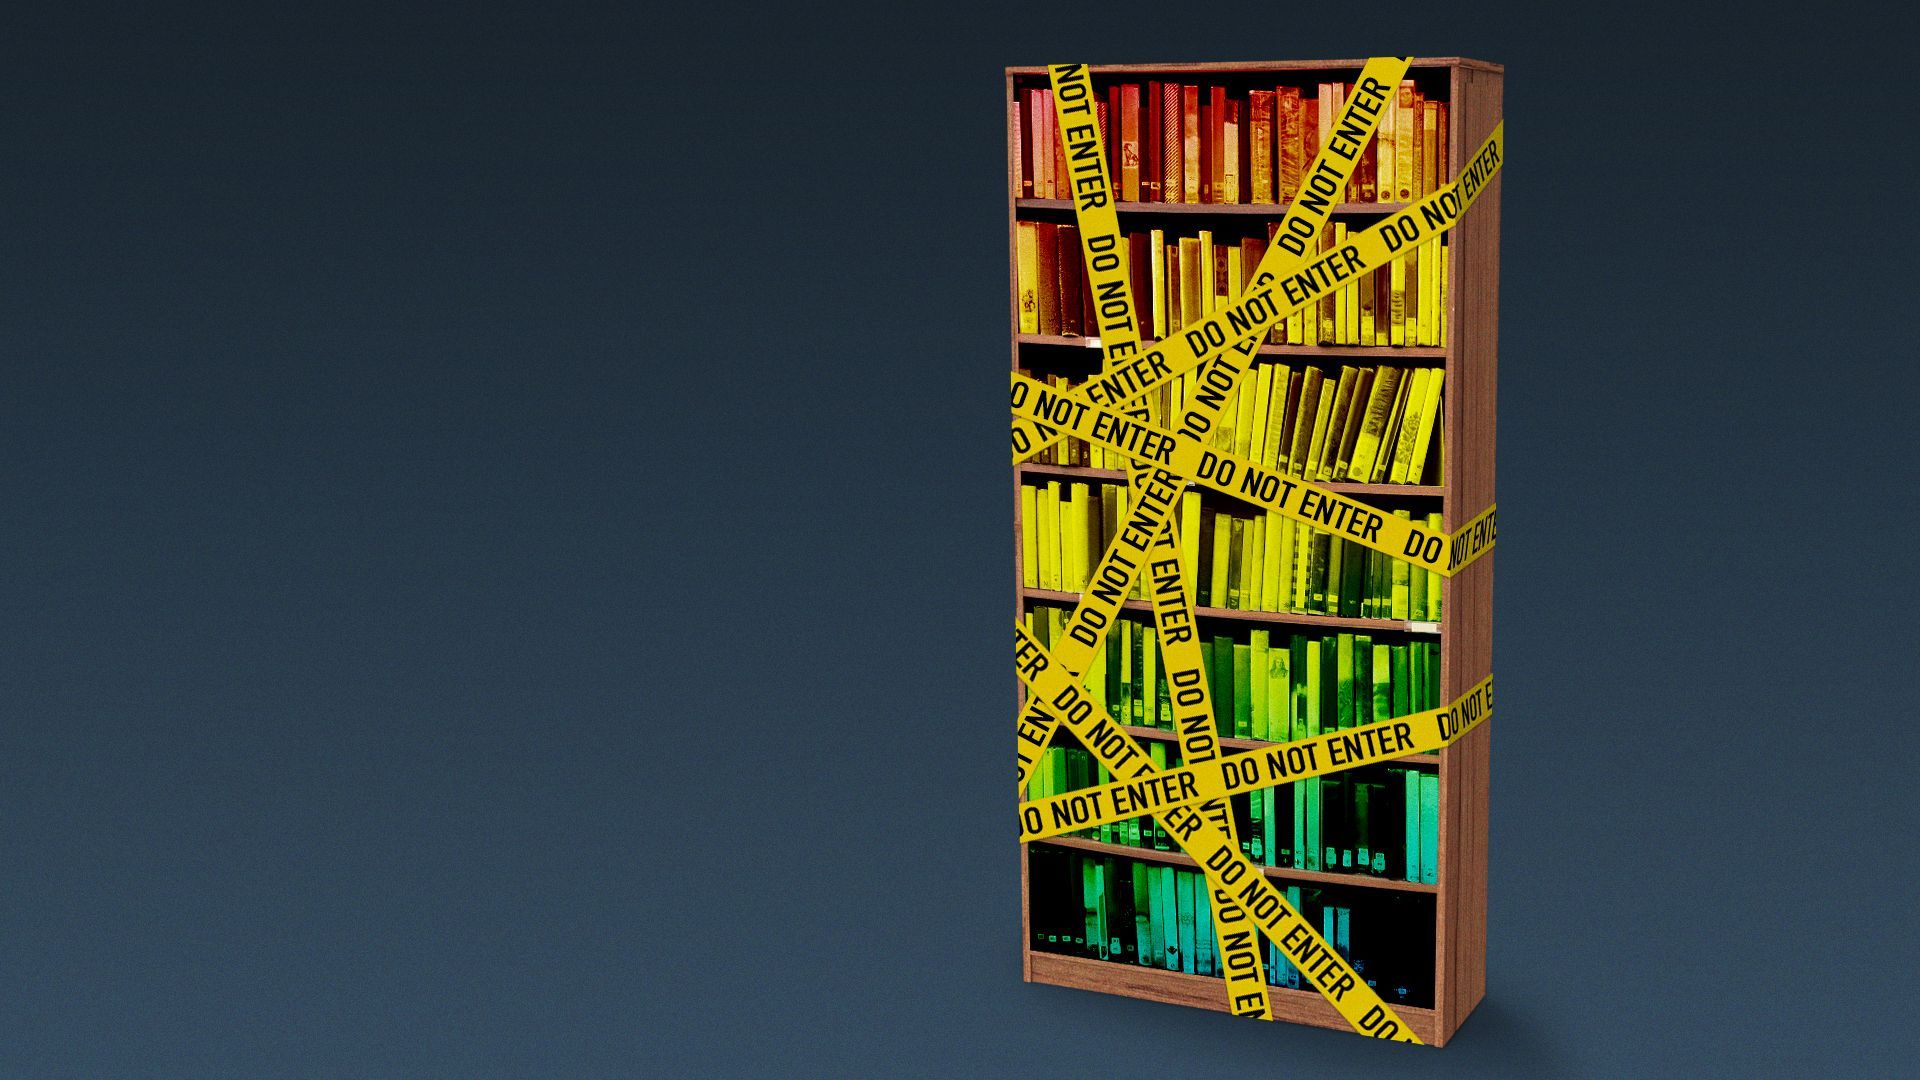 Illustration of a bookshelf with rainbow-colored books wrapped in "do not enter" yellow tape.